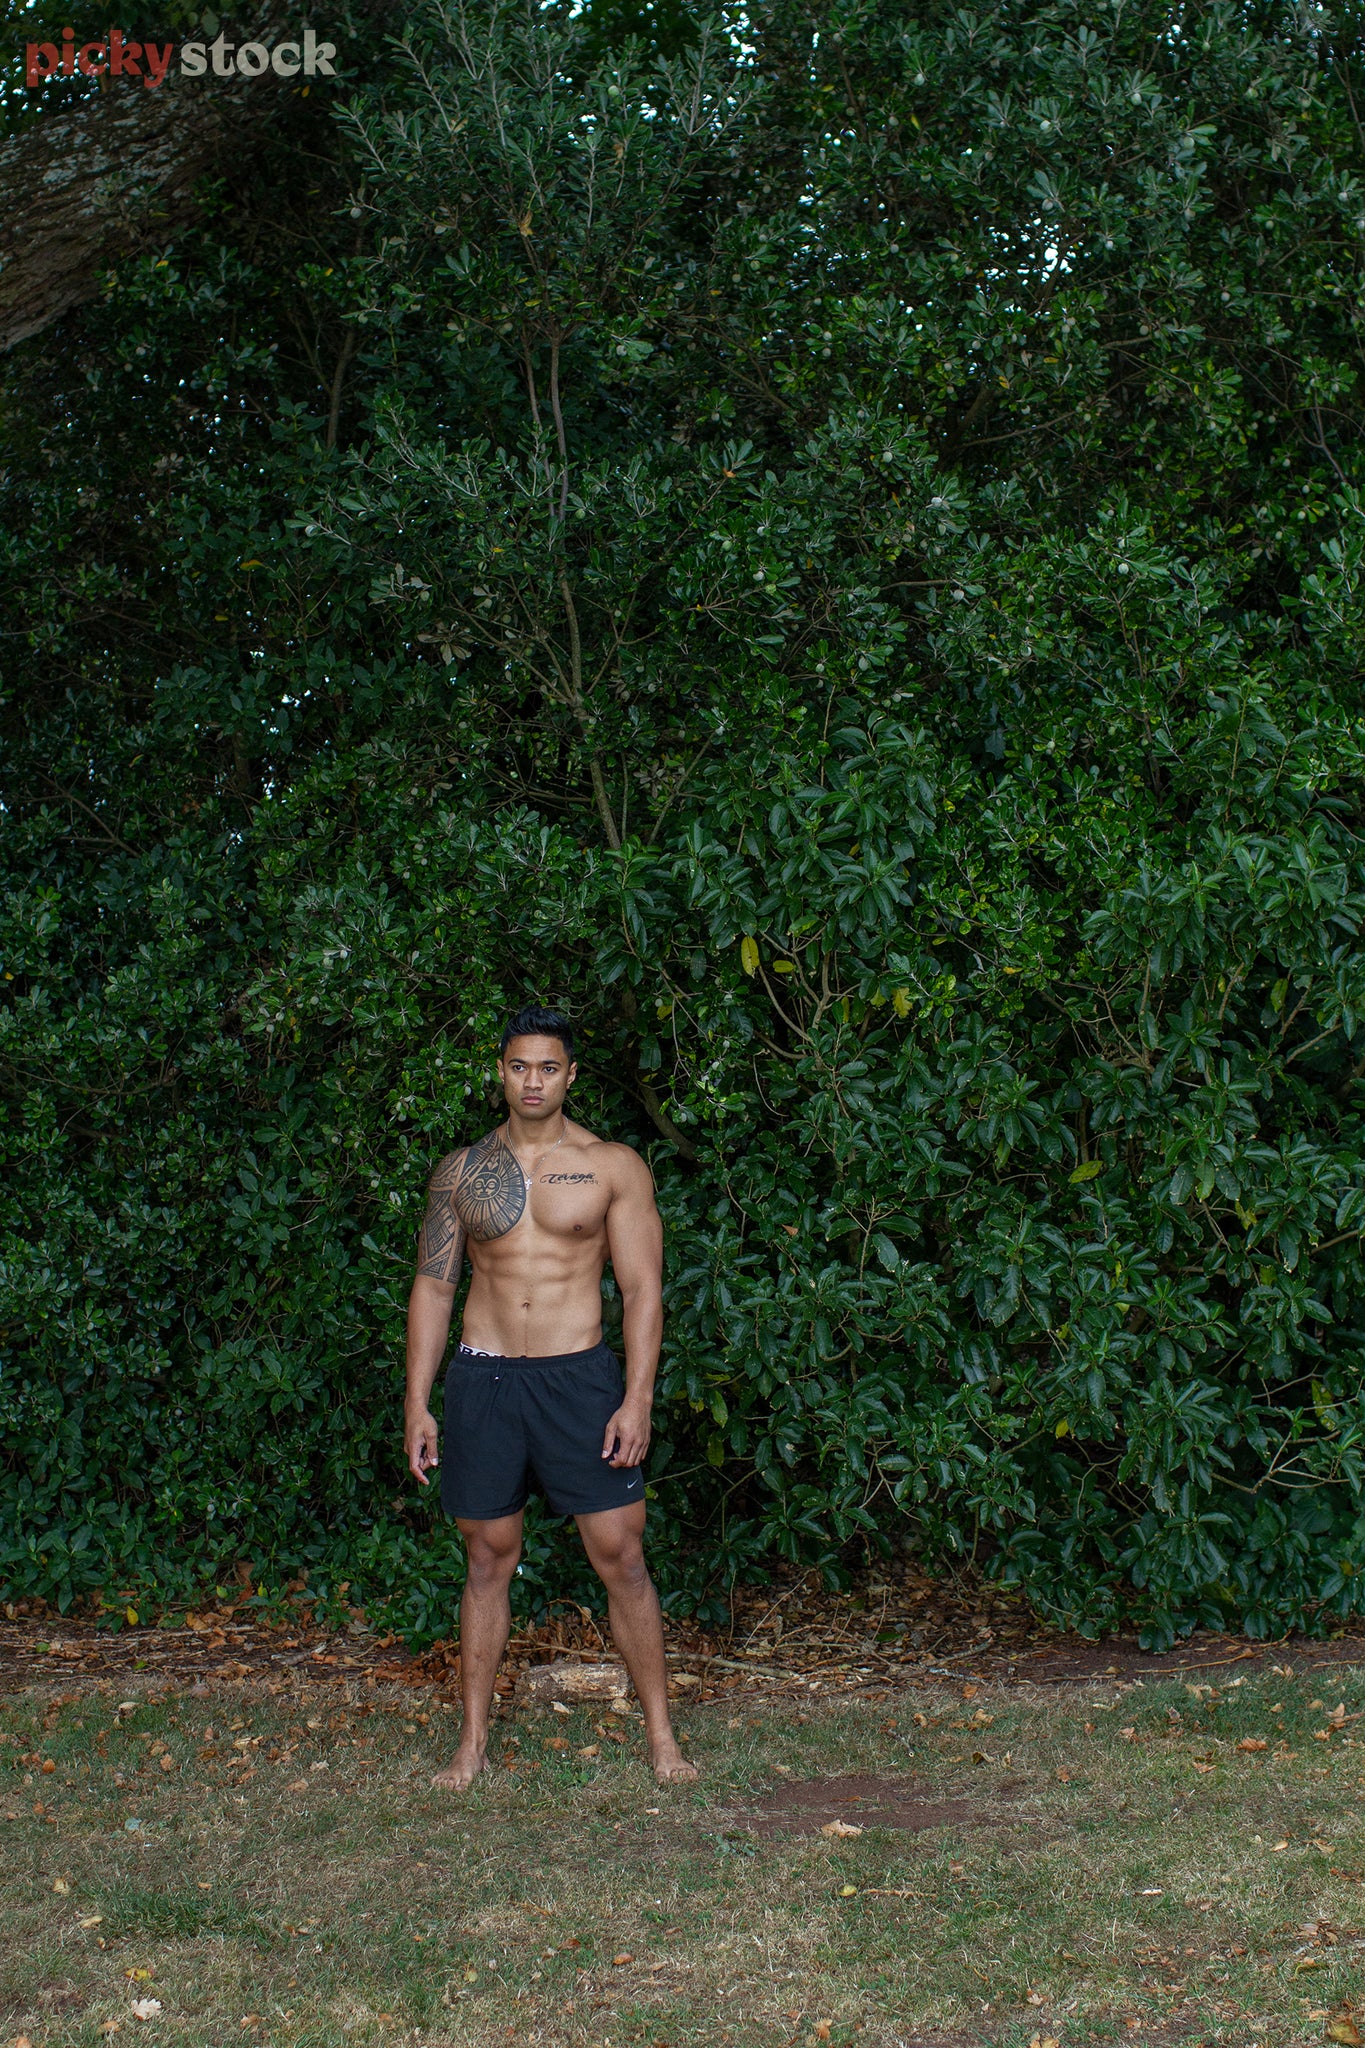 Polynesian man stands confidently in front of large green hedge. Shirtless, his traditional tattoos can be seen on his upper right chest, shoulder and wrapping around his bicep.